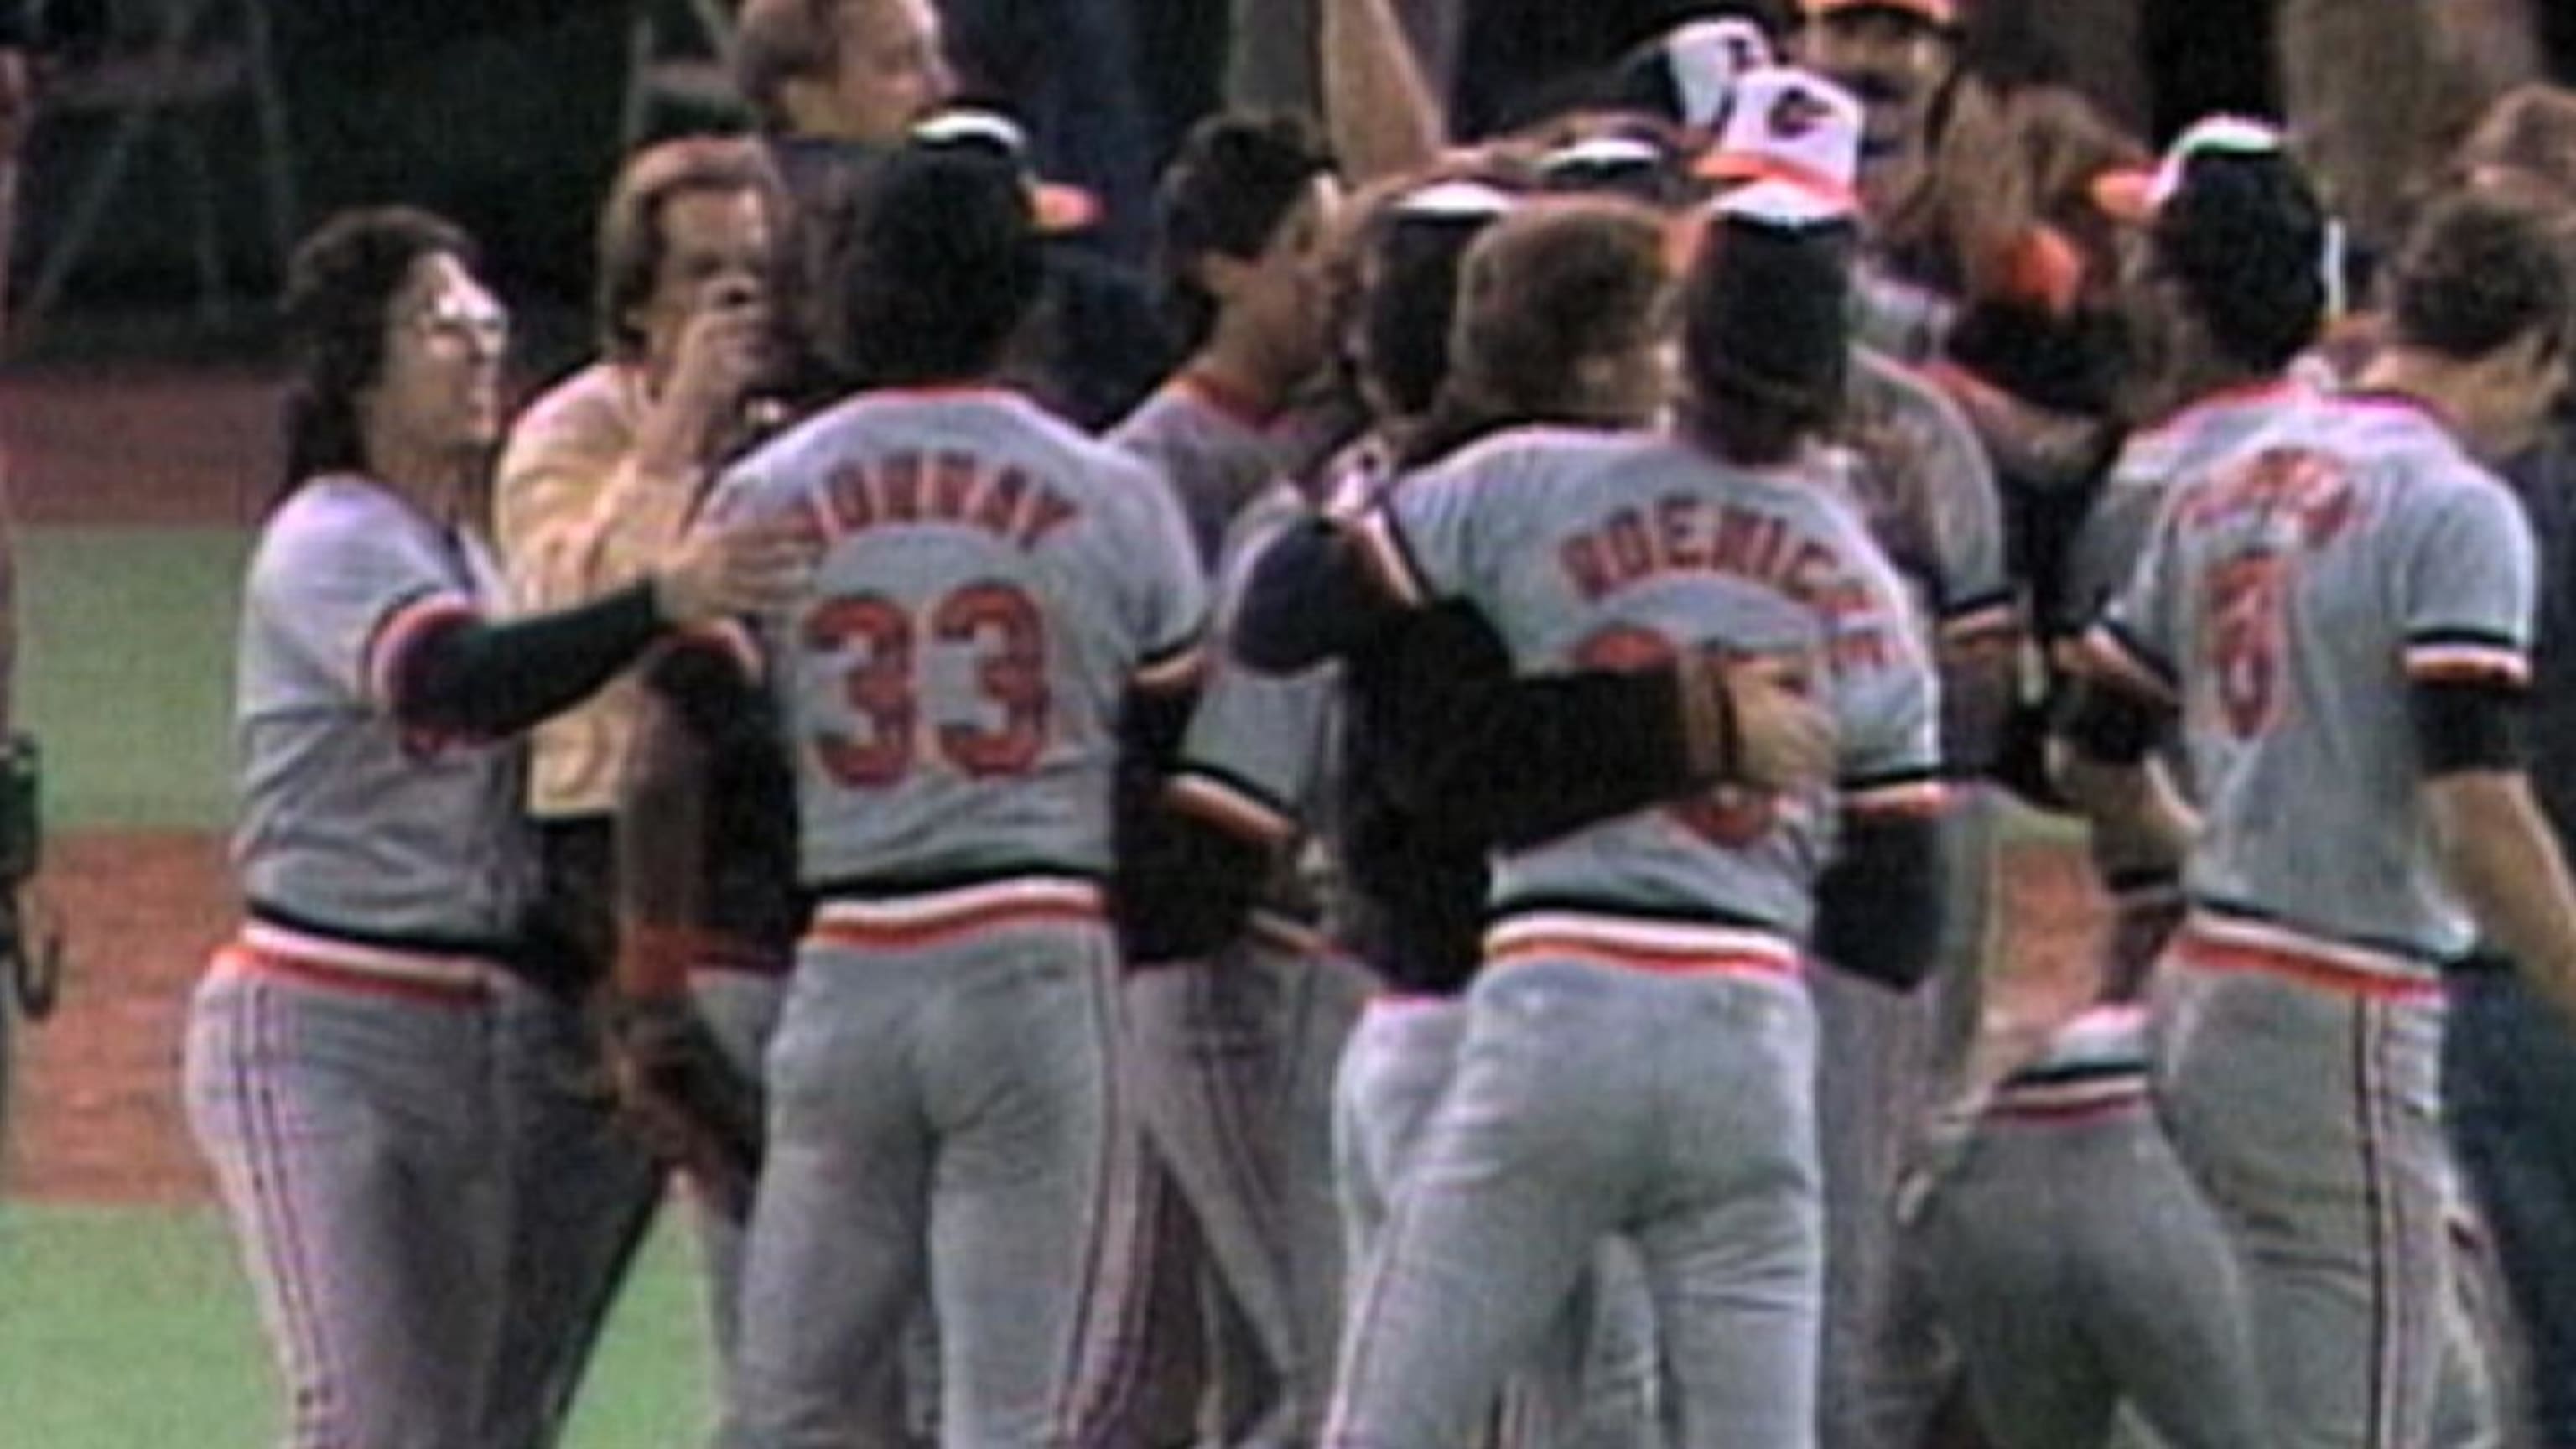 1983 WS Gm5: Orioles win the 1983 World Series 